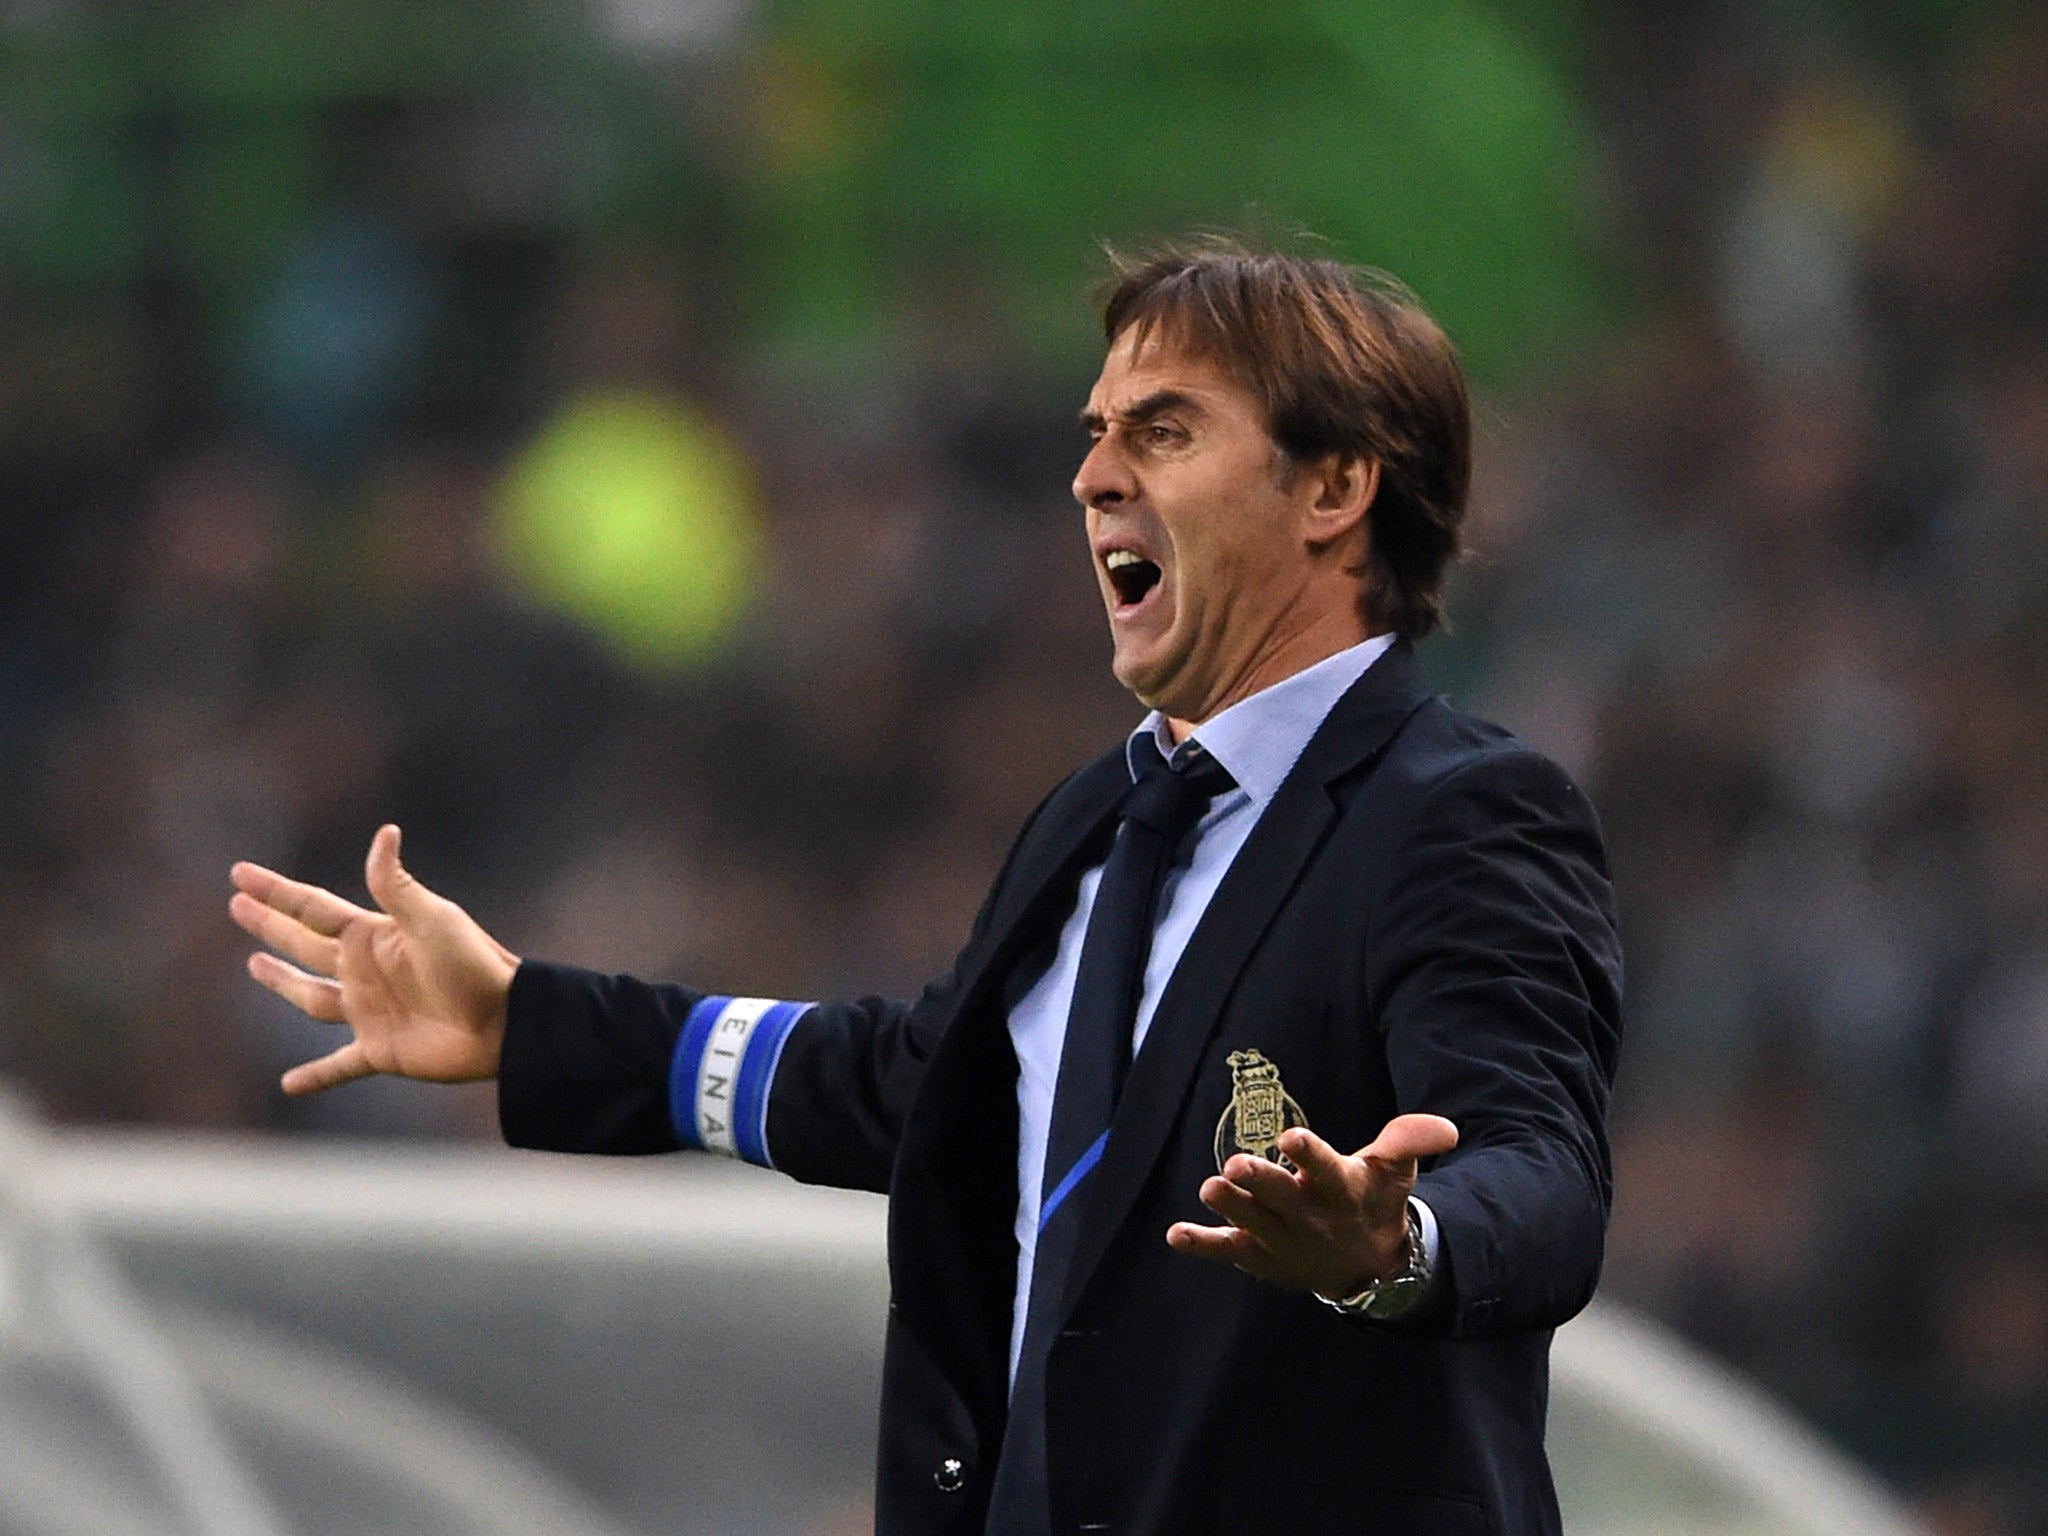 Julen Lopetegui is Spain head coach, but managed Porto previously